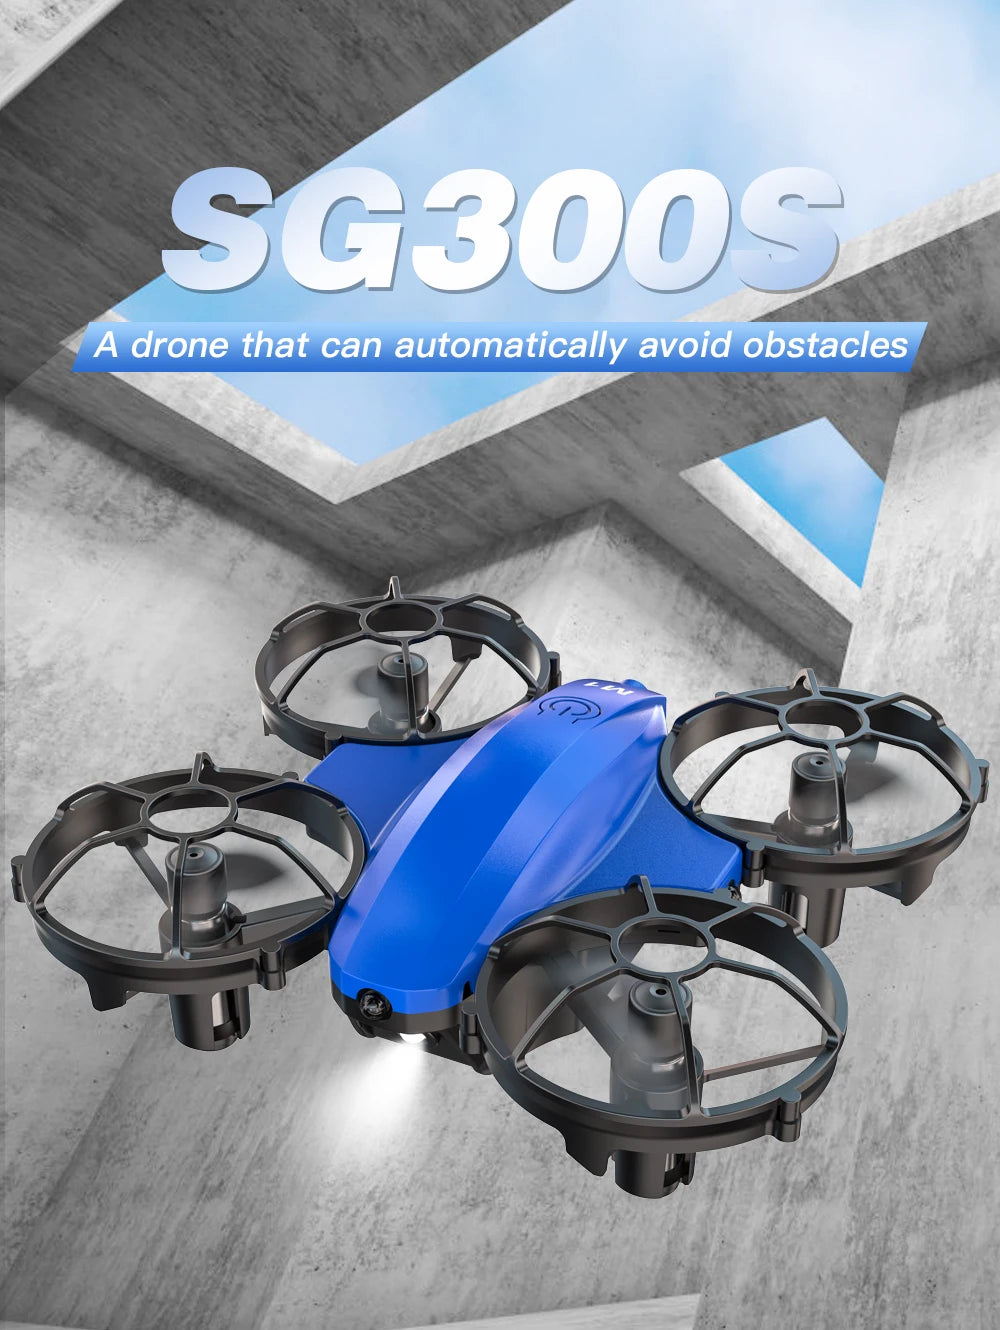 54300s a drone that can automatically avoid